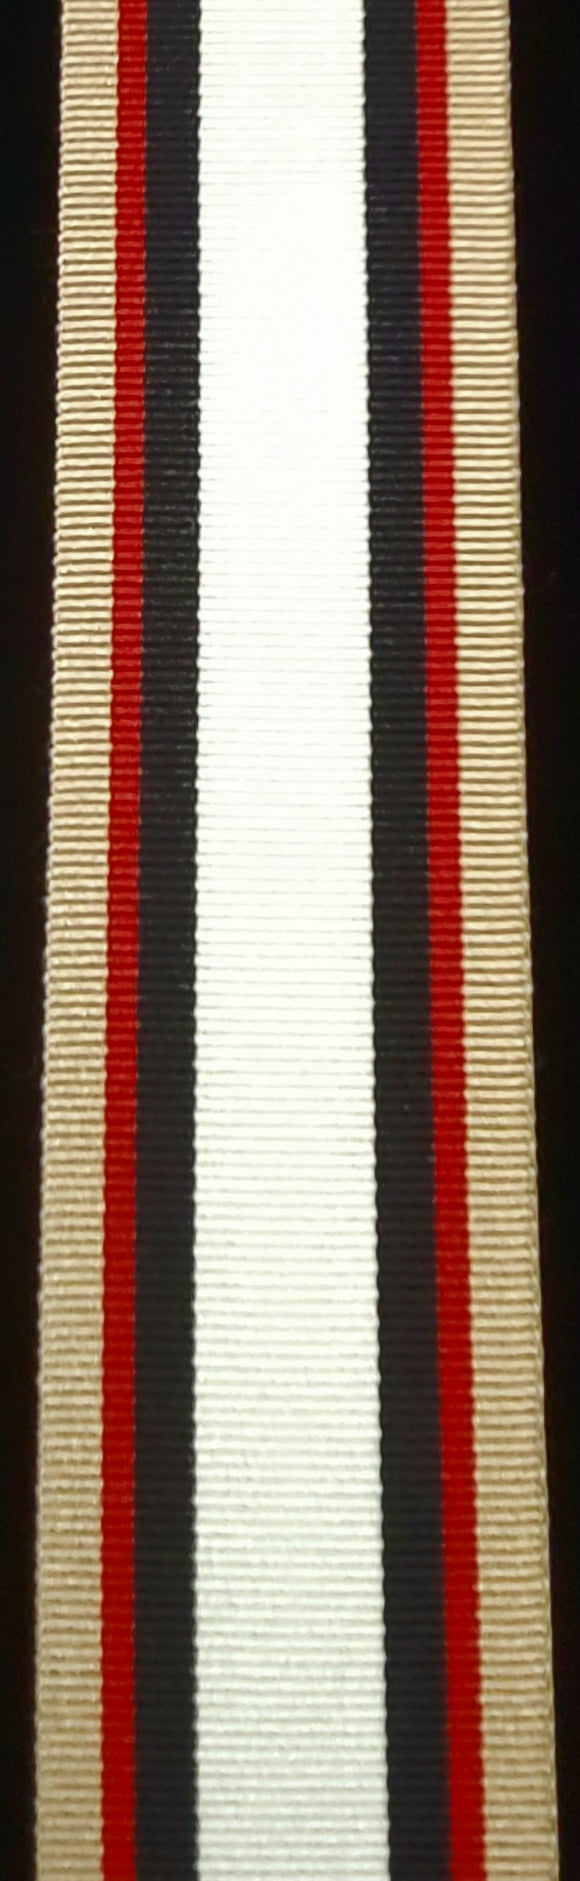 Ribbon, Canadian South West Asia Service Medal (SWASM)